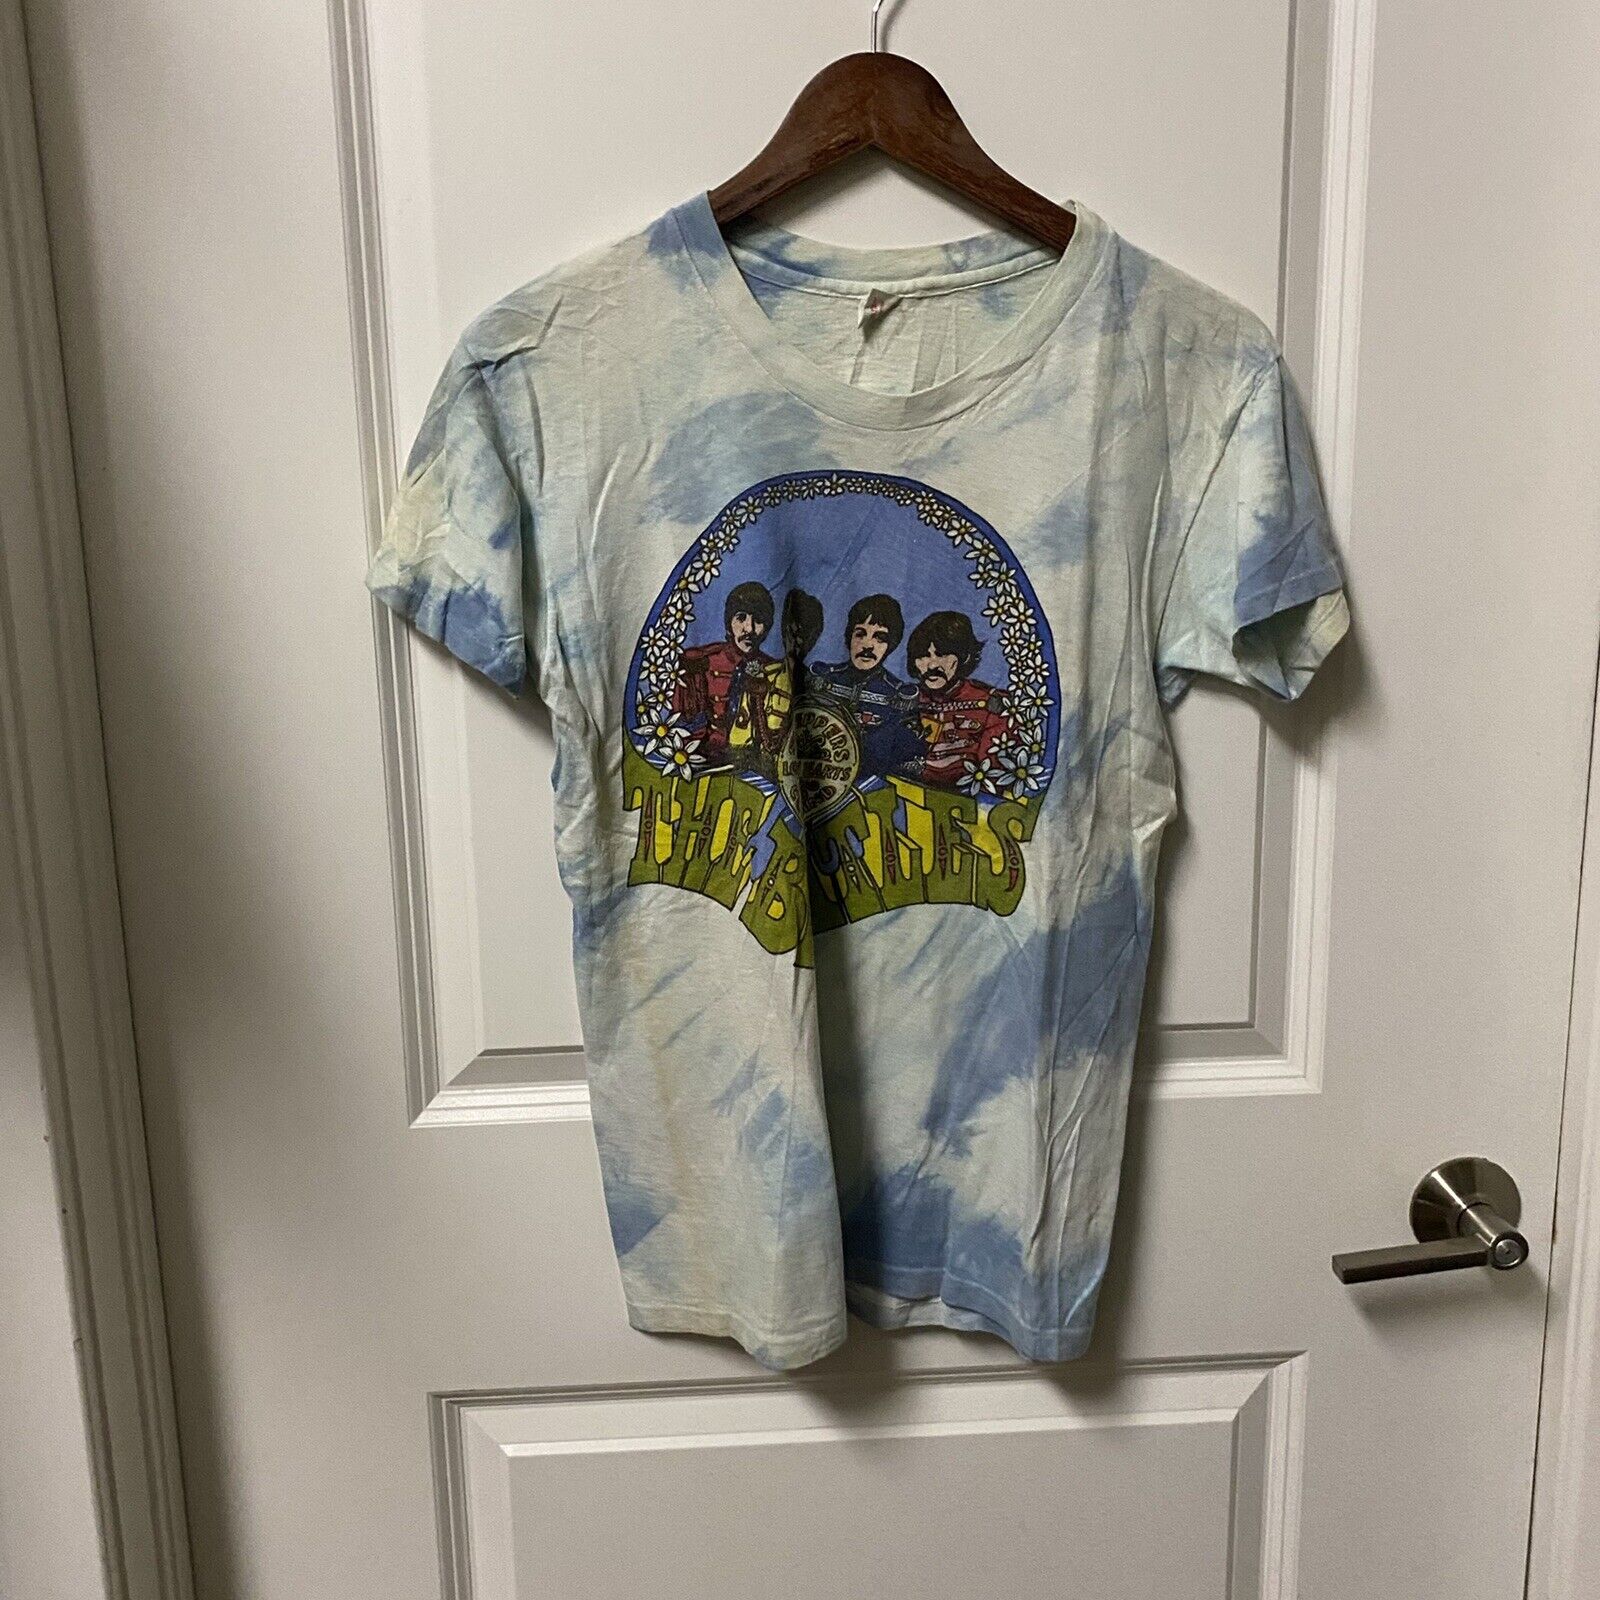 Vintage 70s The Beatles Sgt Peppers Lonely Hearts Shirt Size Medium